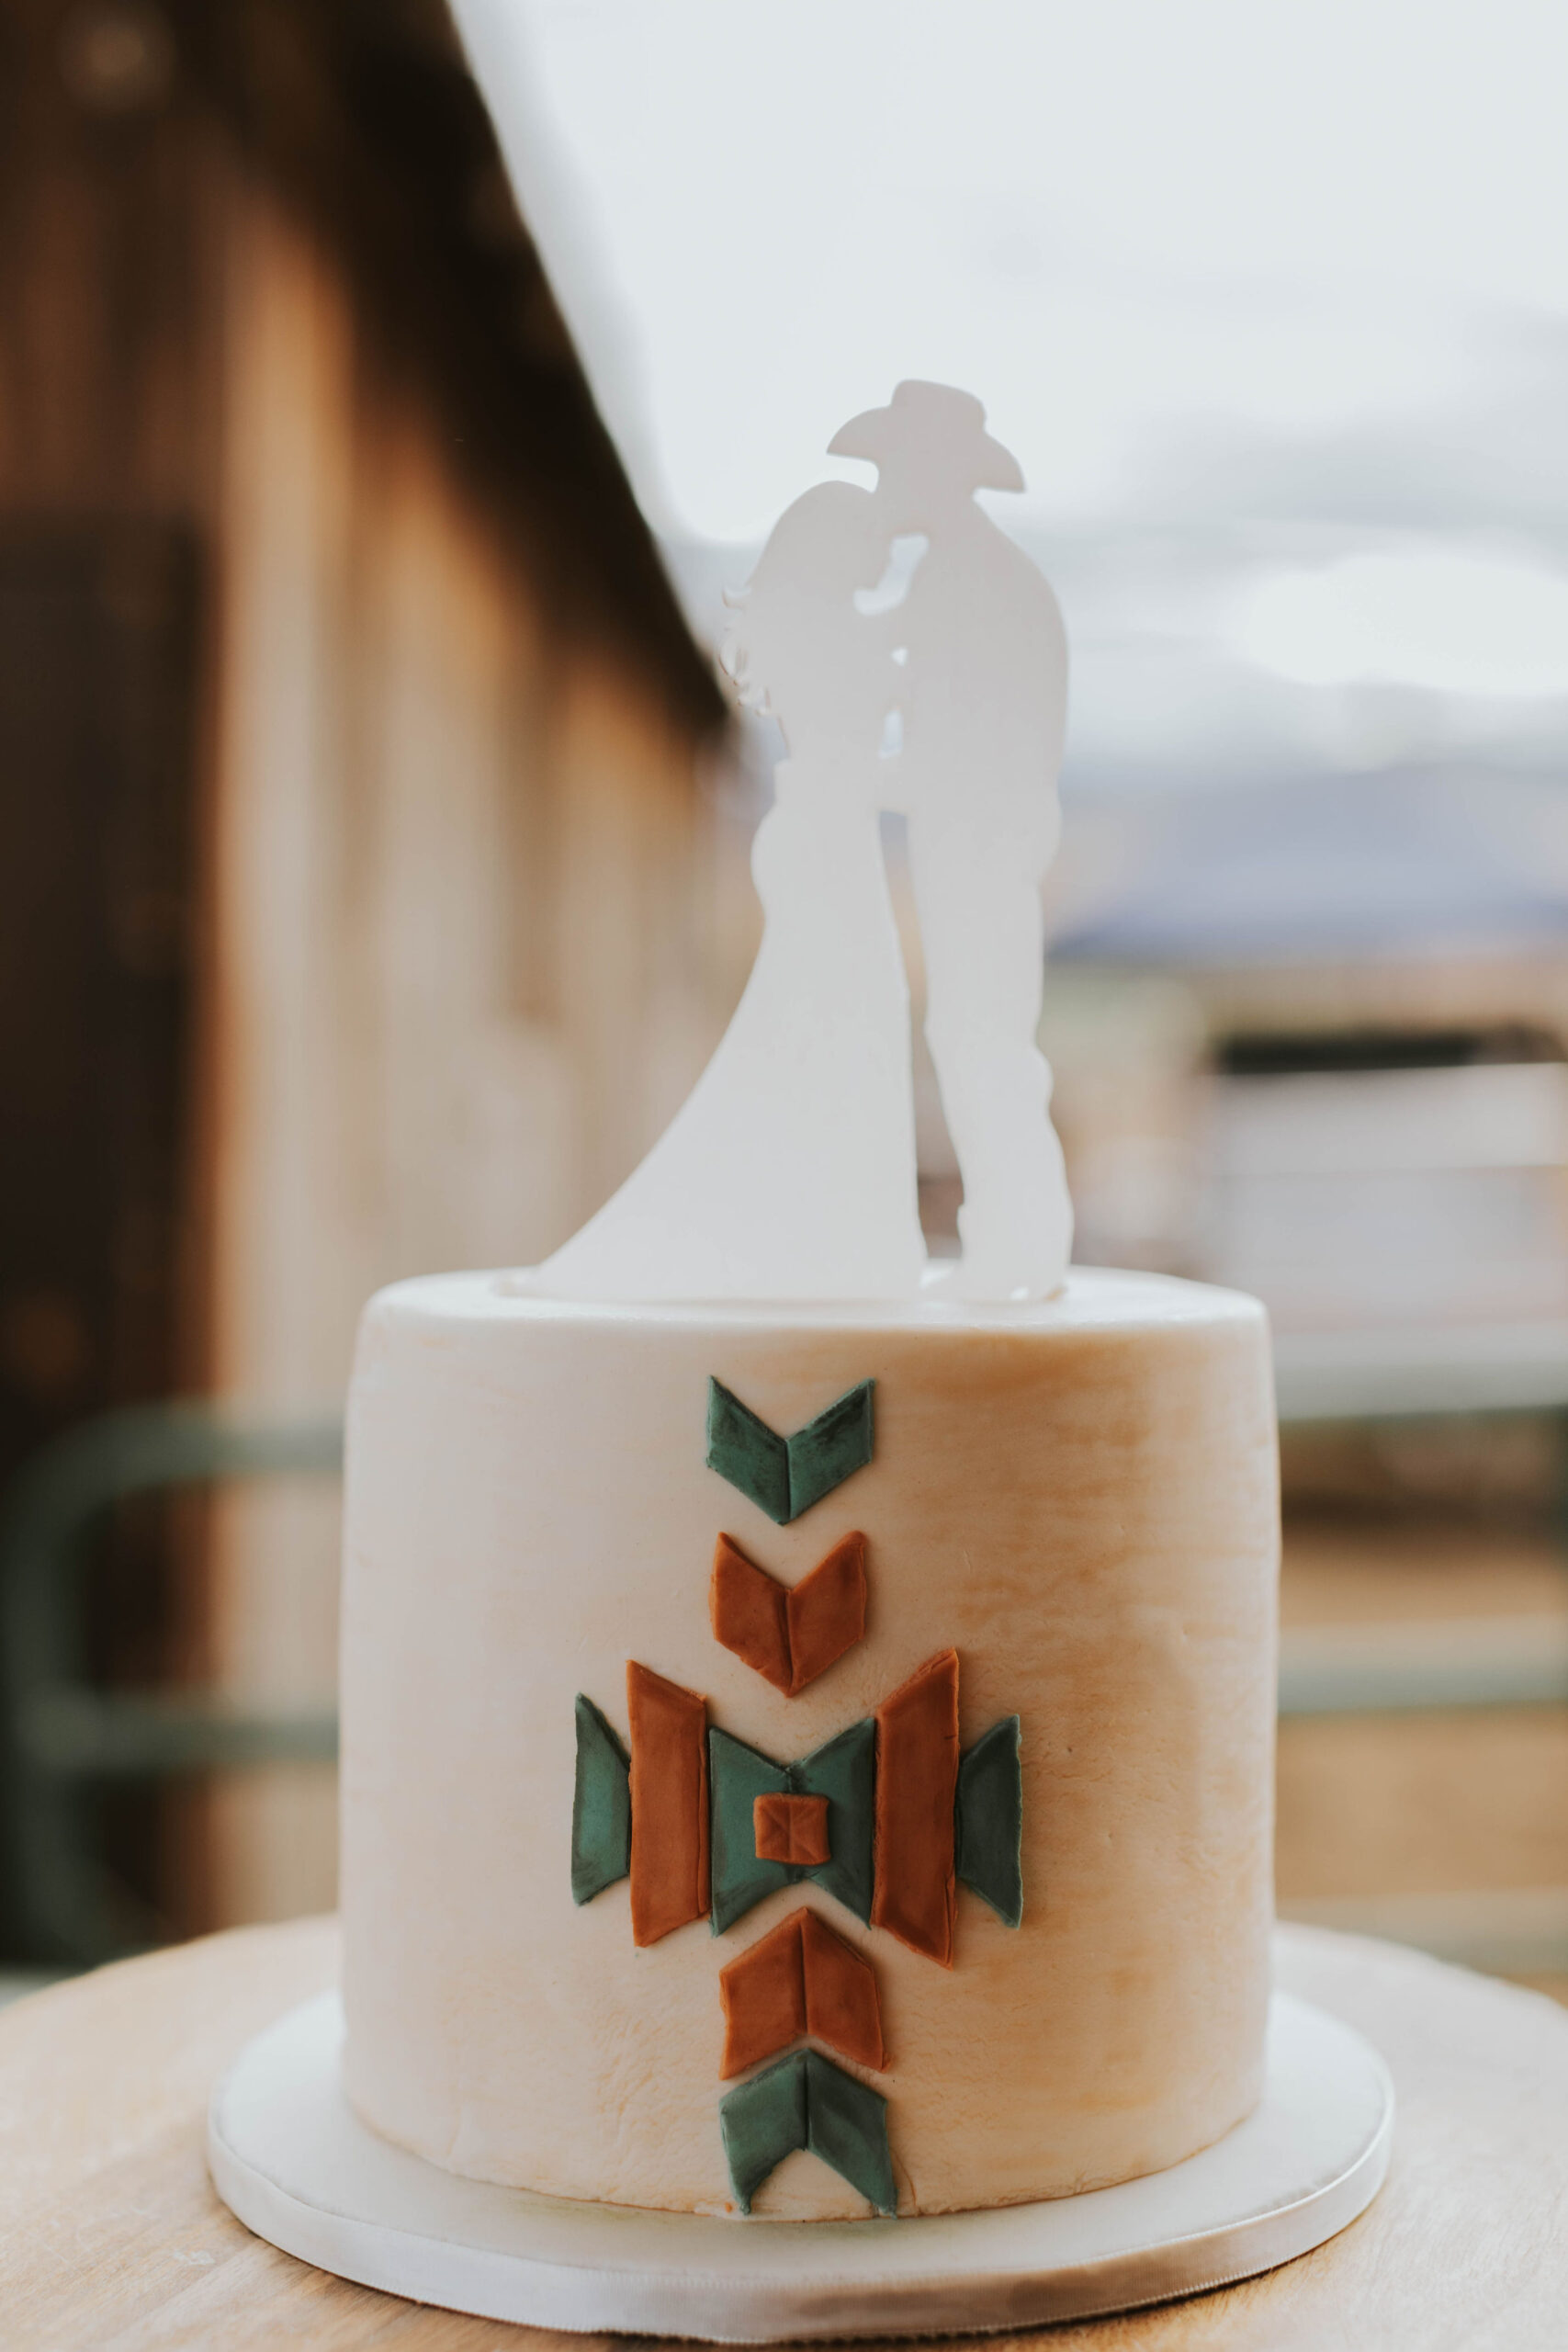 wedding cake with bride and groom with cowboy hat and southwestern accents in a rustic orange wedding